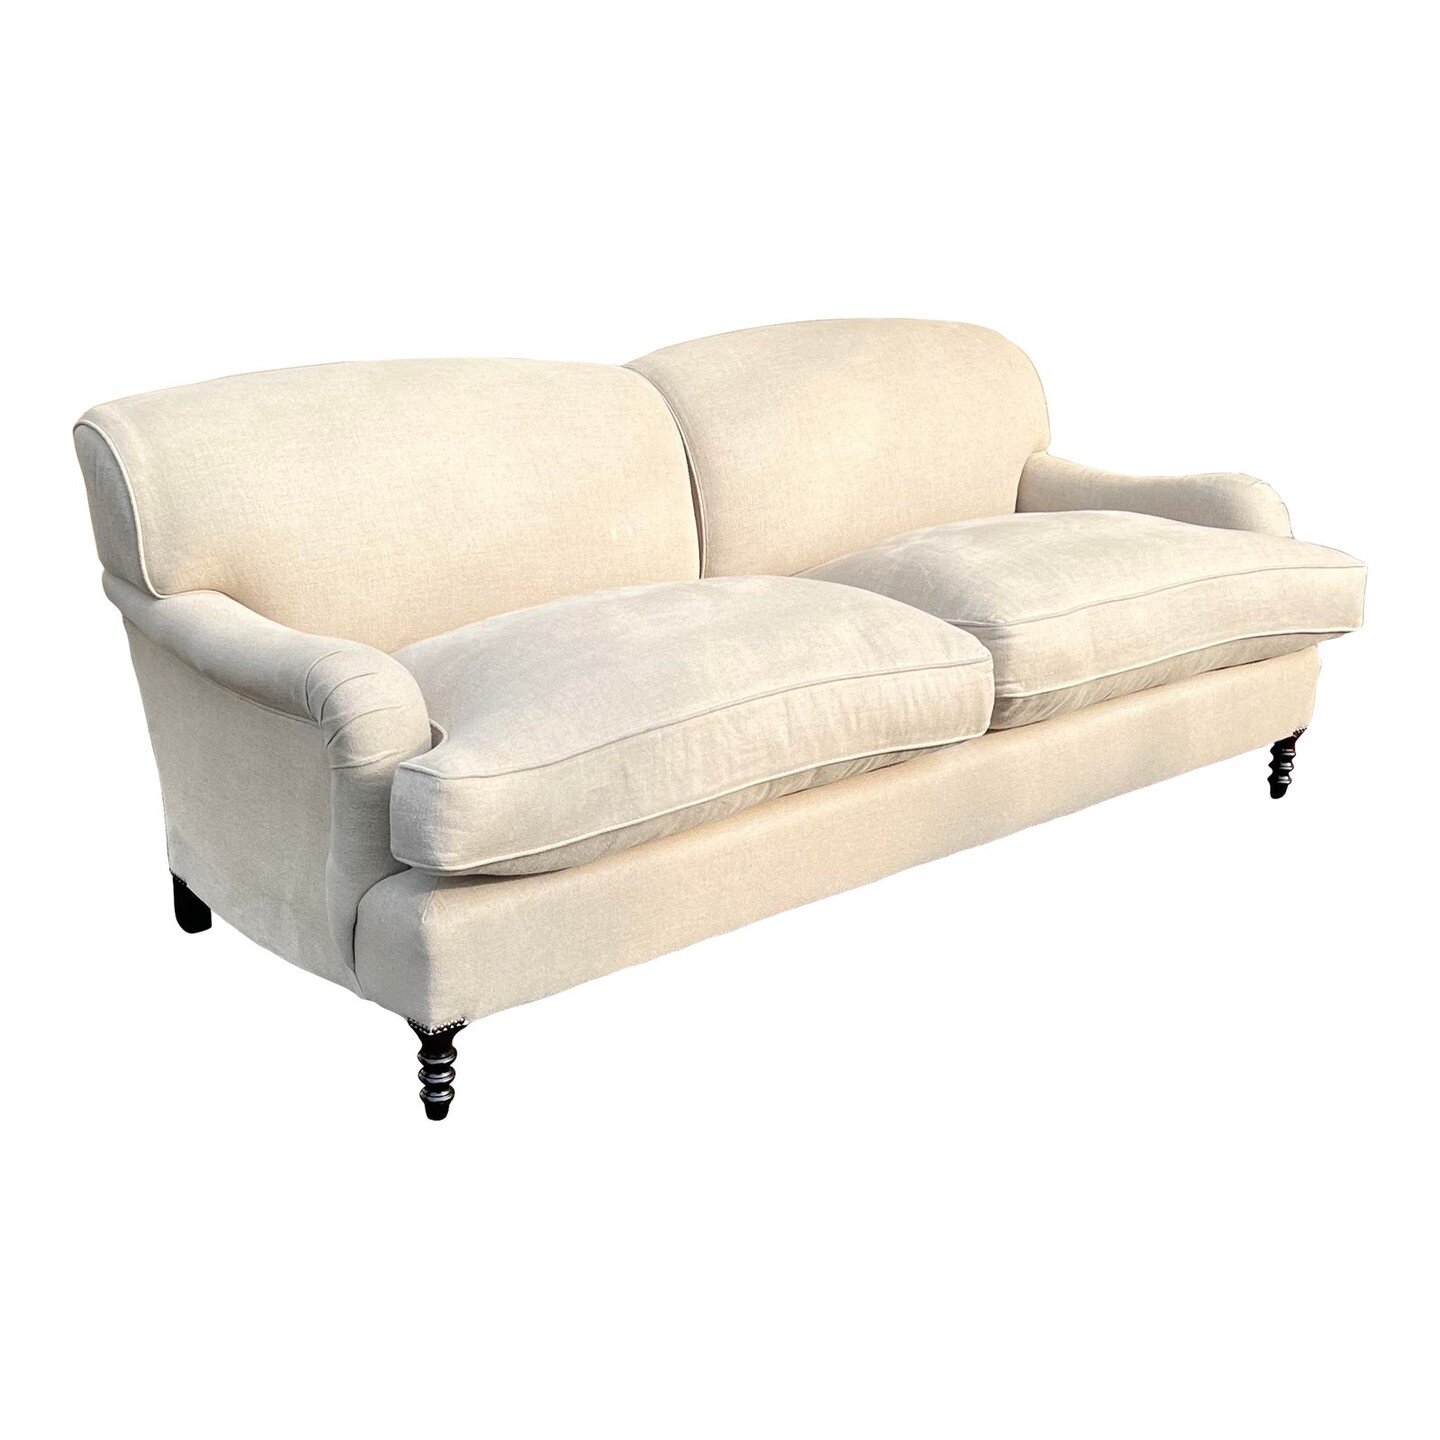 Standard Arm Sofa in the manner of George Smith

Standard Arm Sofa in the Manner of George Smith in a neutral fabric. The sofa has full down cushions and sits on turned legs.

Dimensions: 84ʺW &times; 39ʺD &times; 35ʺH

Materials: Down, Fabric and Wo